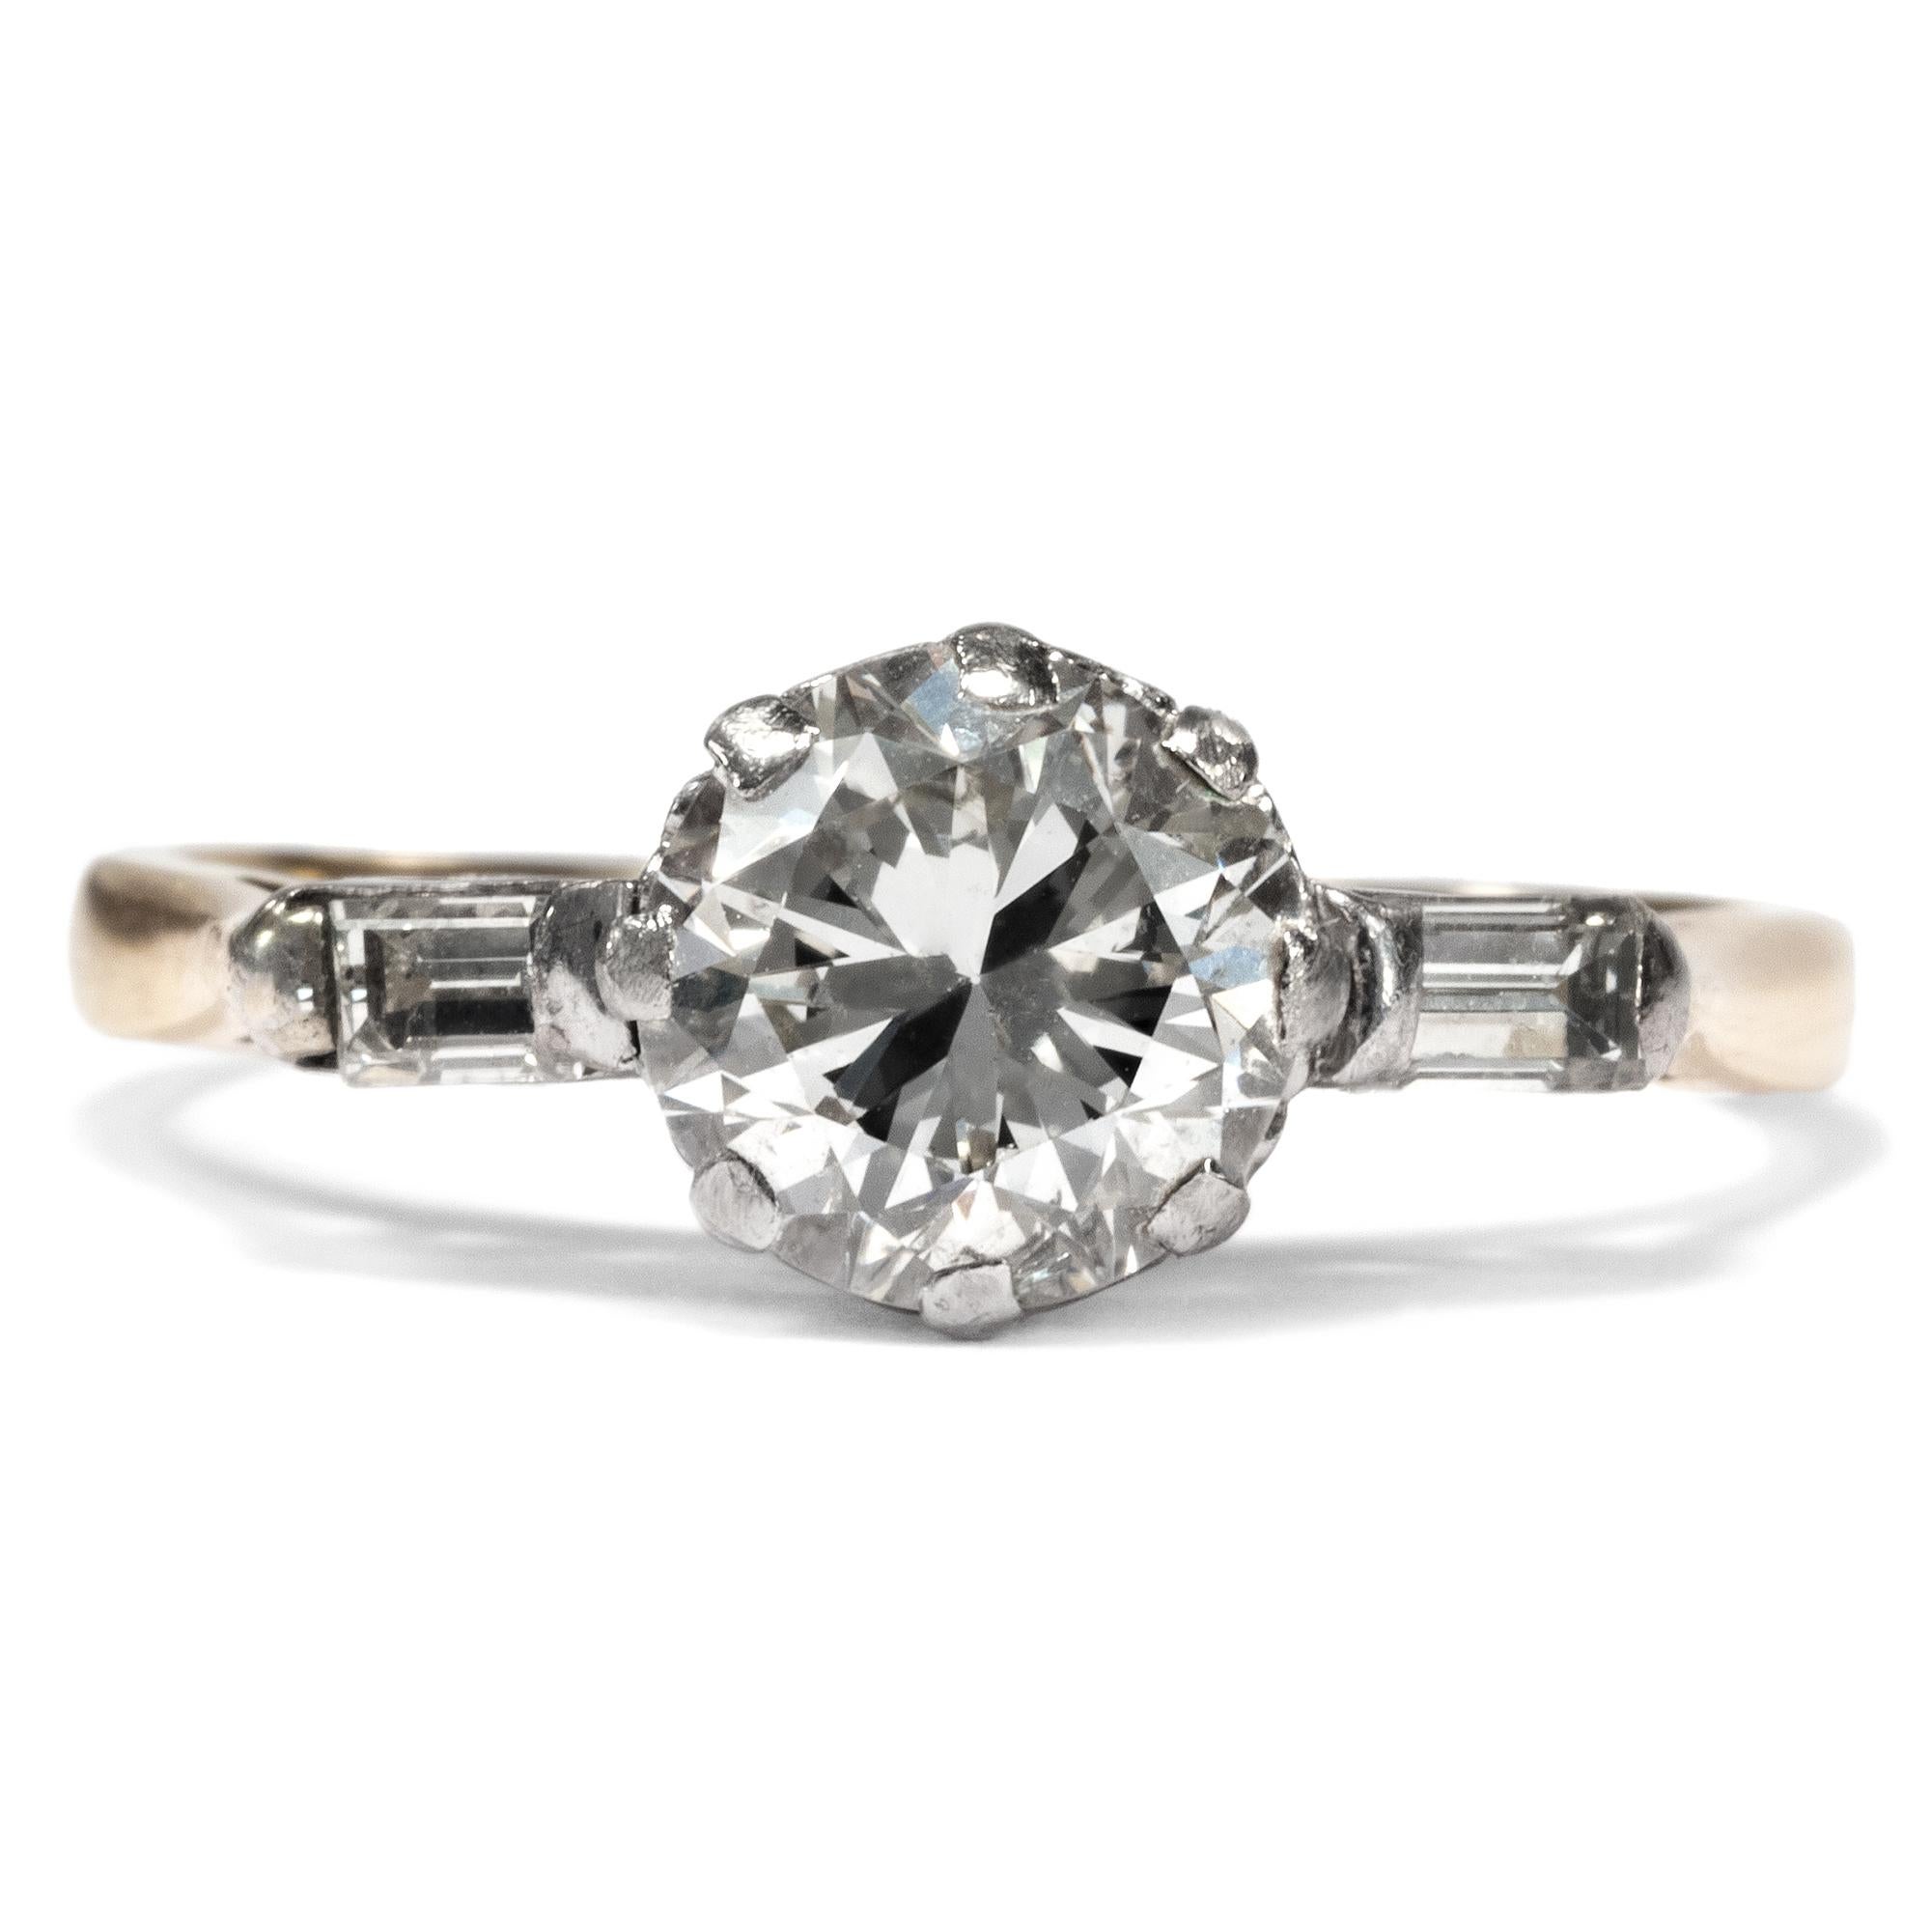 Nowadays, engagement rings are almost synonymous with diamond solitaire rings. It wasn't always this way: The first recorded diamond engagement ring was only exchanged in 1477, given to Mary of Burgundy by the Arch Duke Maximilian of Austria. Yet